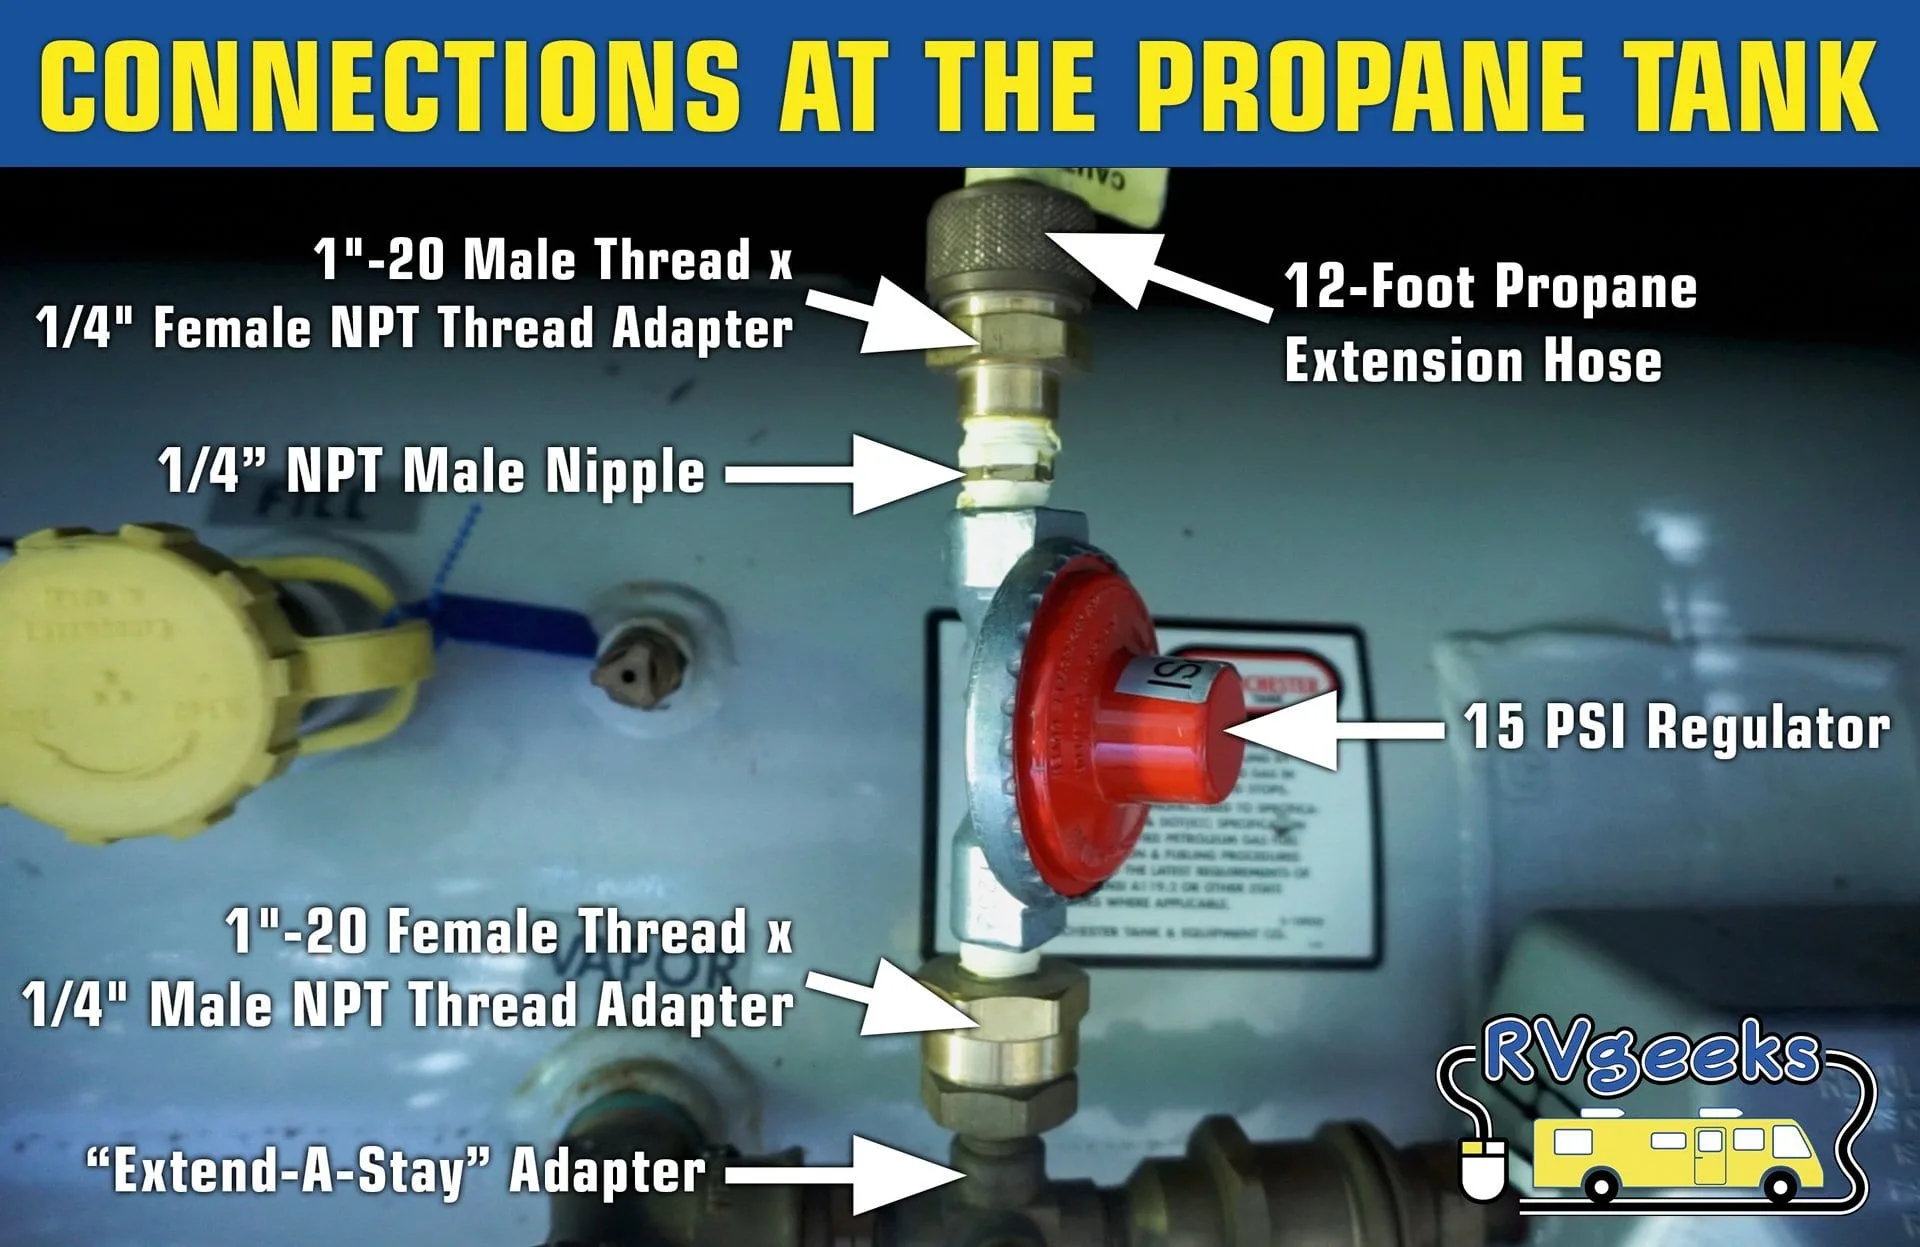 Connections at the propane tank shown